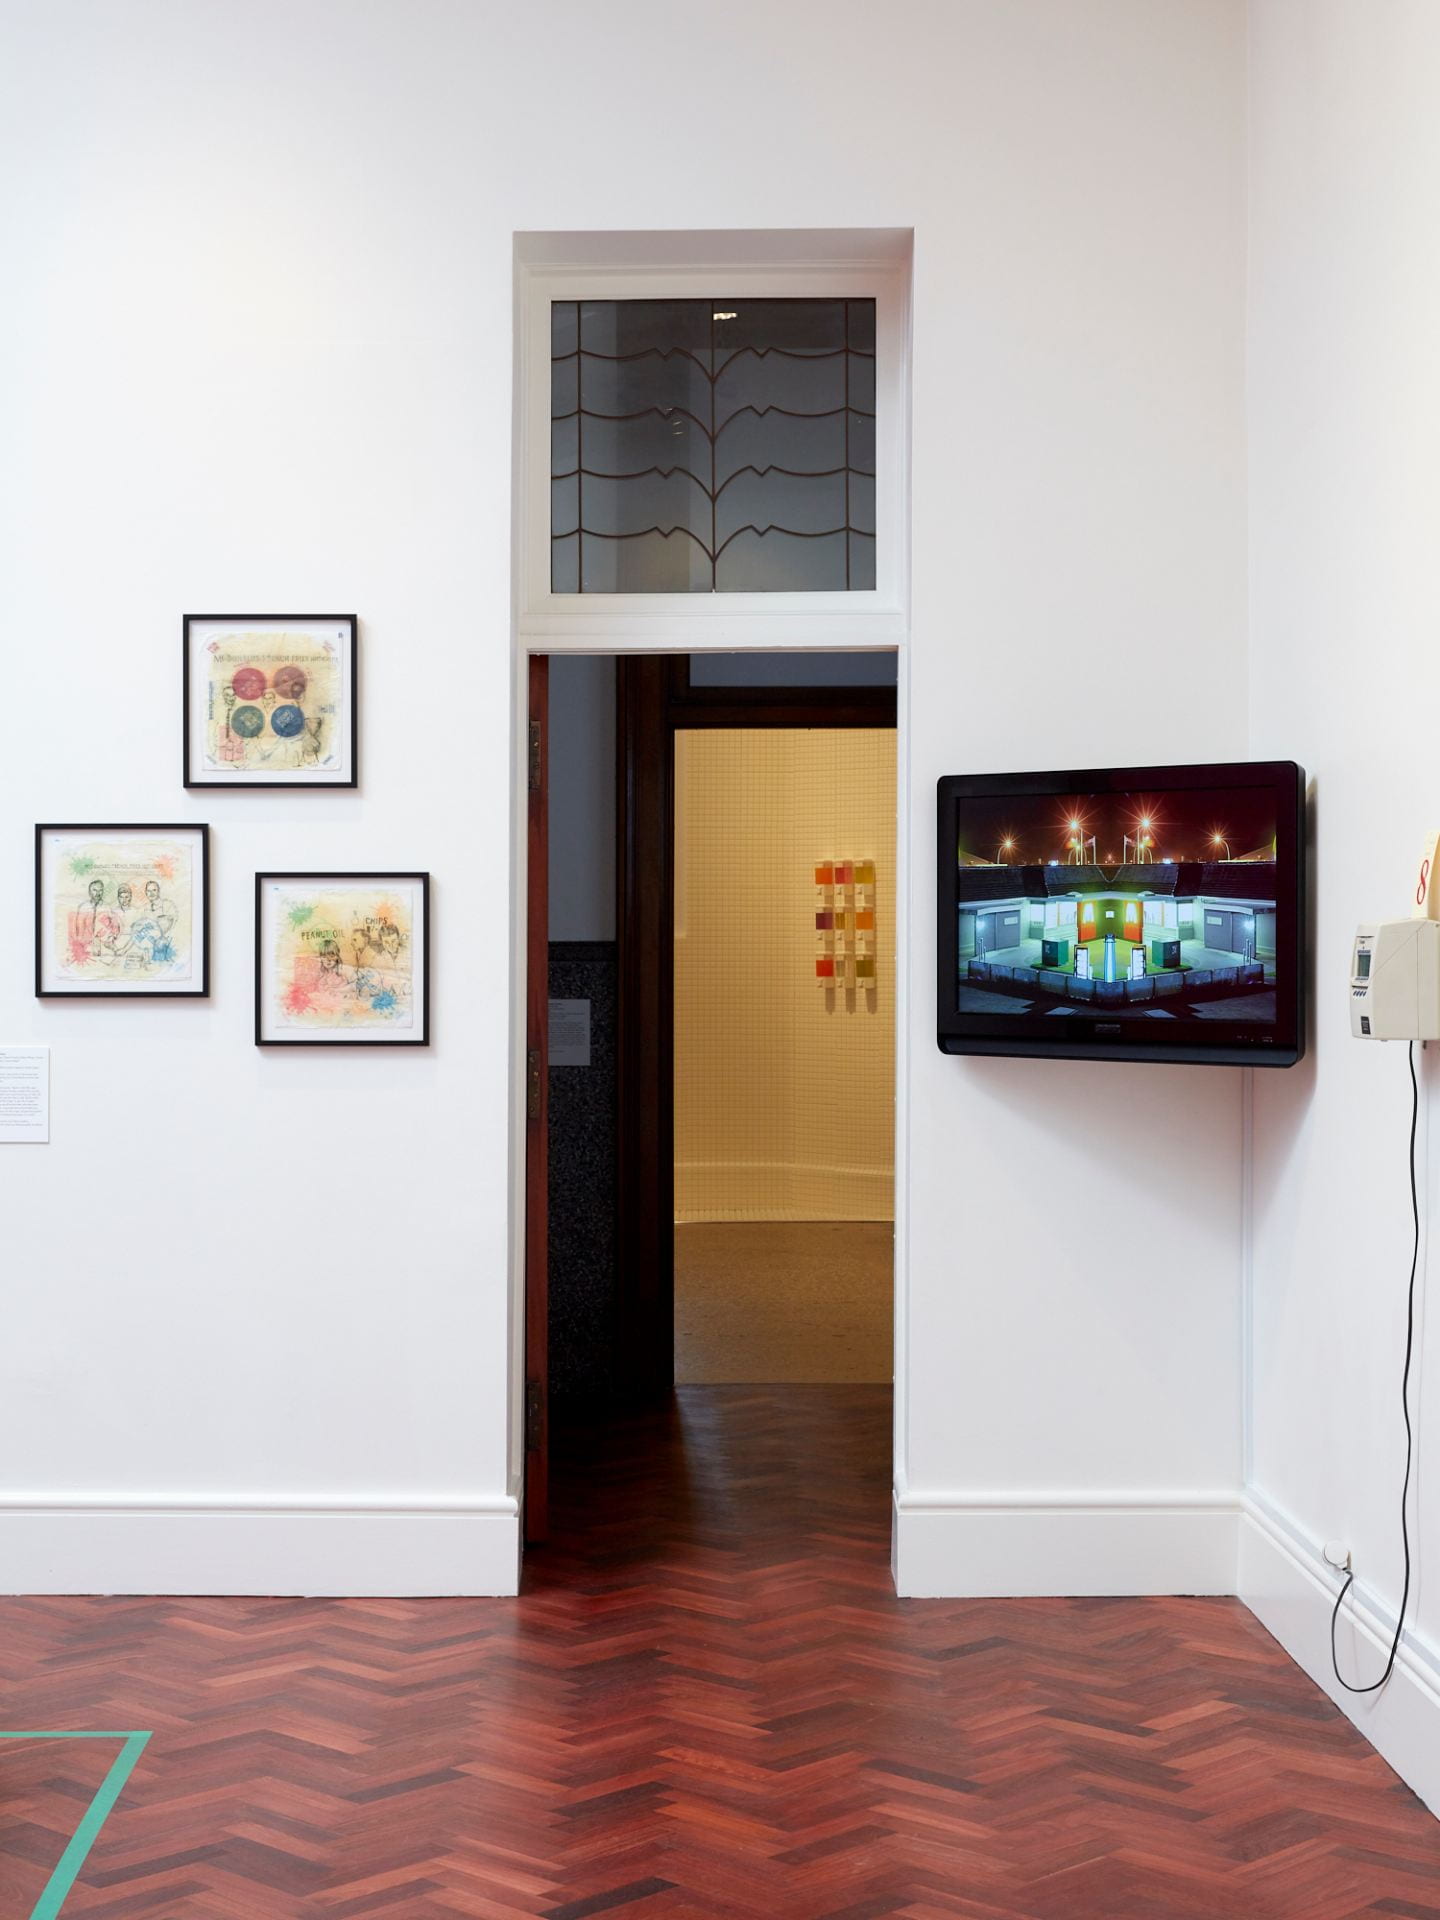 A door into another gallery. On the left of the door is three framed artworks of McDonald's wrappers with ink drawings traced onto each. On the right is a flatscreen TV, mounted against the corner of the wall, showing a car endlessly looping through a McDonald's drive thru.